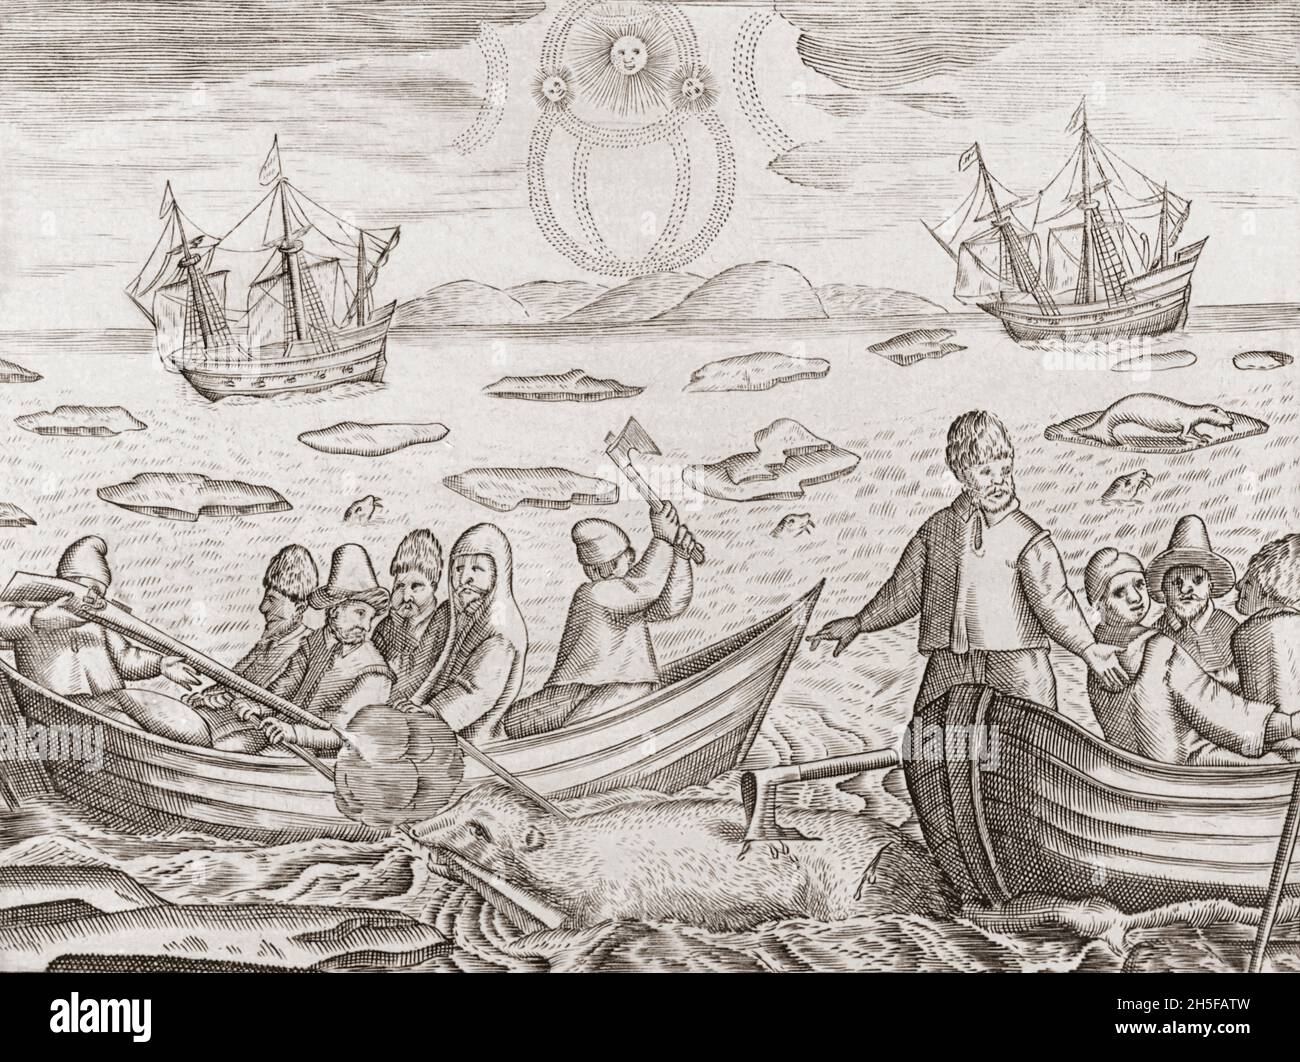 Mariners hunting polar bears in the Arctic ocean in the early 17th century.  From a 17th century work by an unidentified artist. Stock Photo